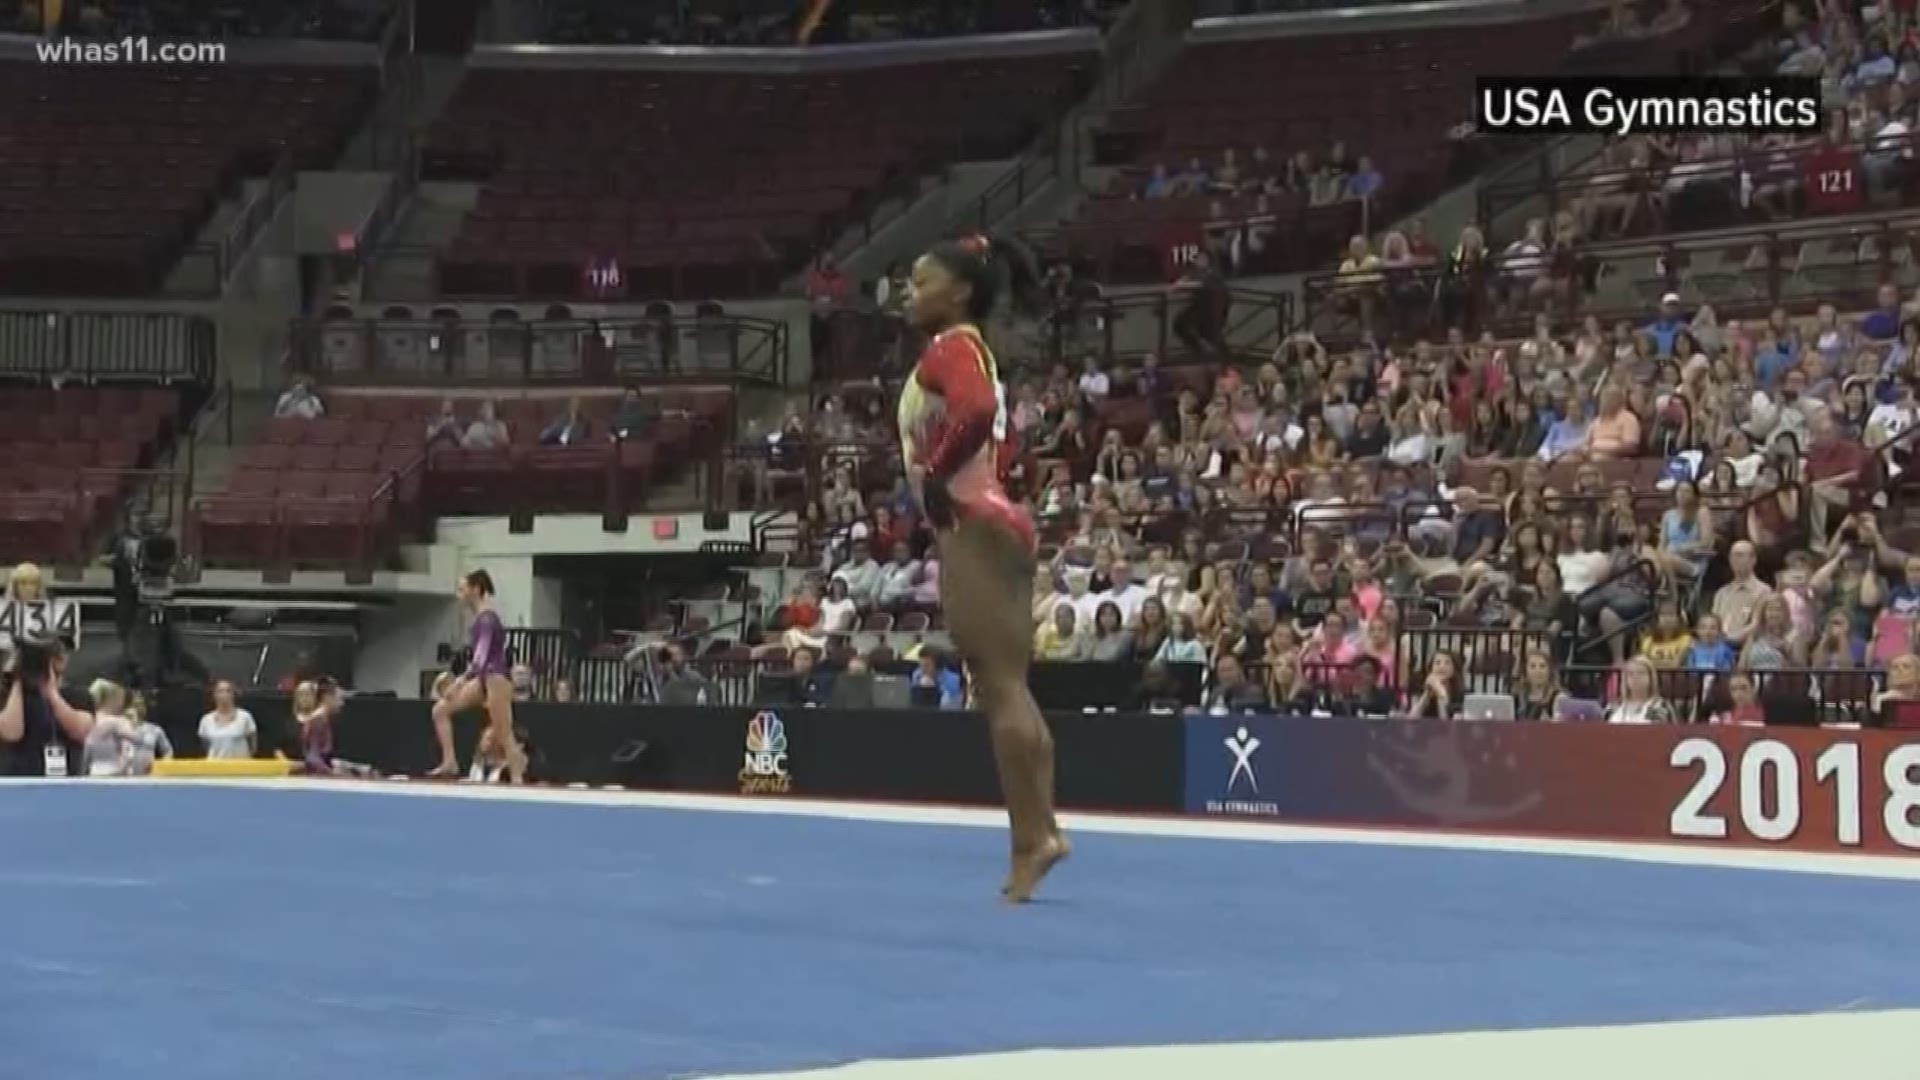 Olympic champion Simone Biles is just a year away from trying to win yet another gold medal but right now she is in Louisville.